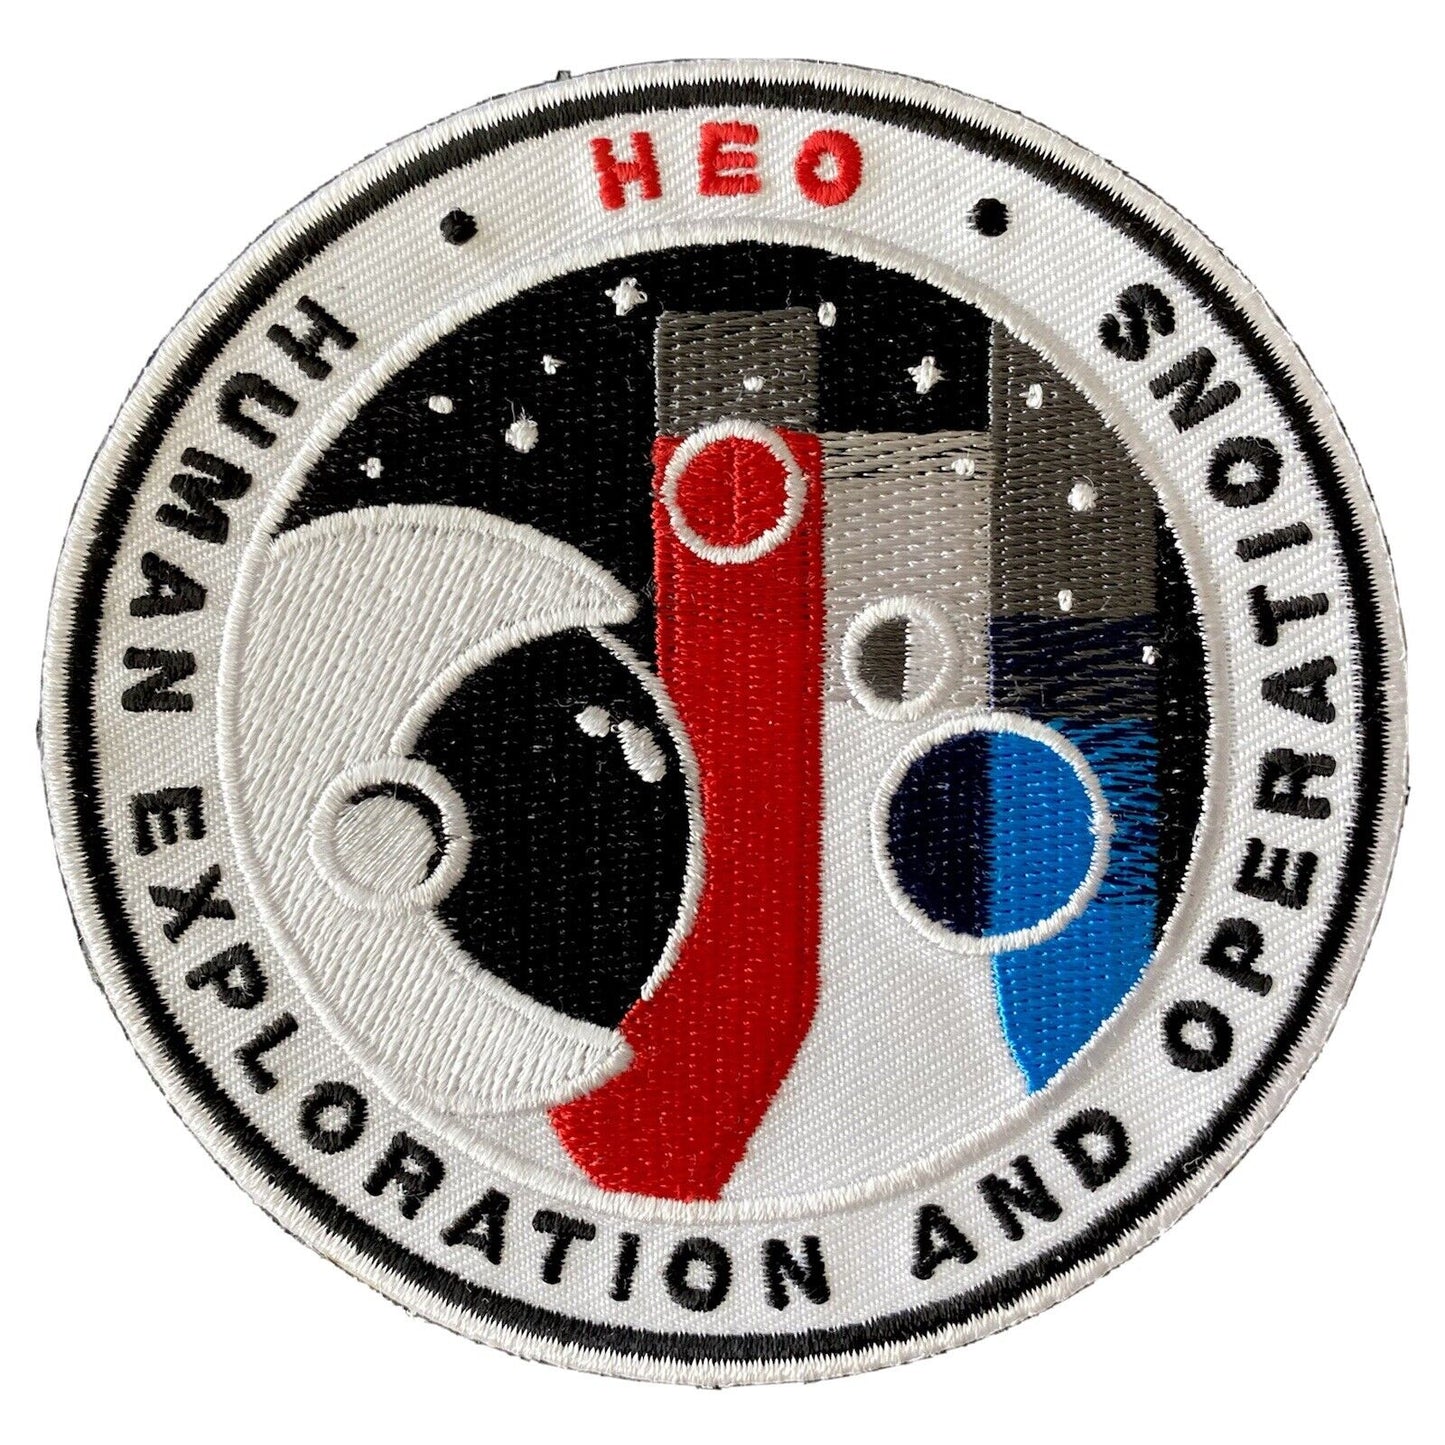 NASA HUMAN EXPLORATION and OPERATIONS - HEO- SPACE PATCH - 3.5"